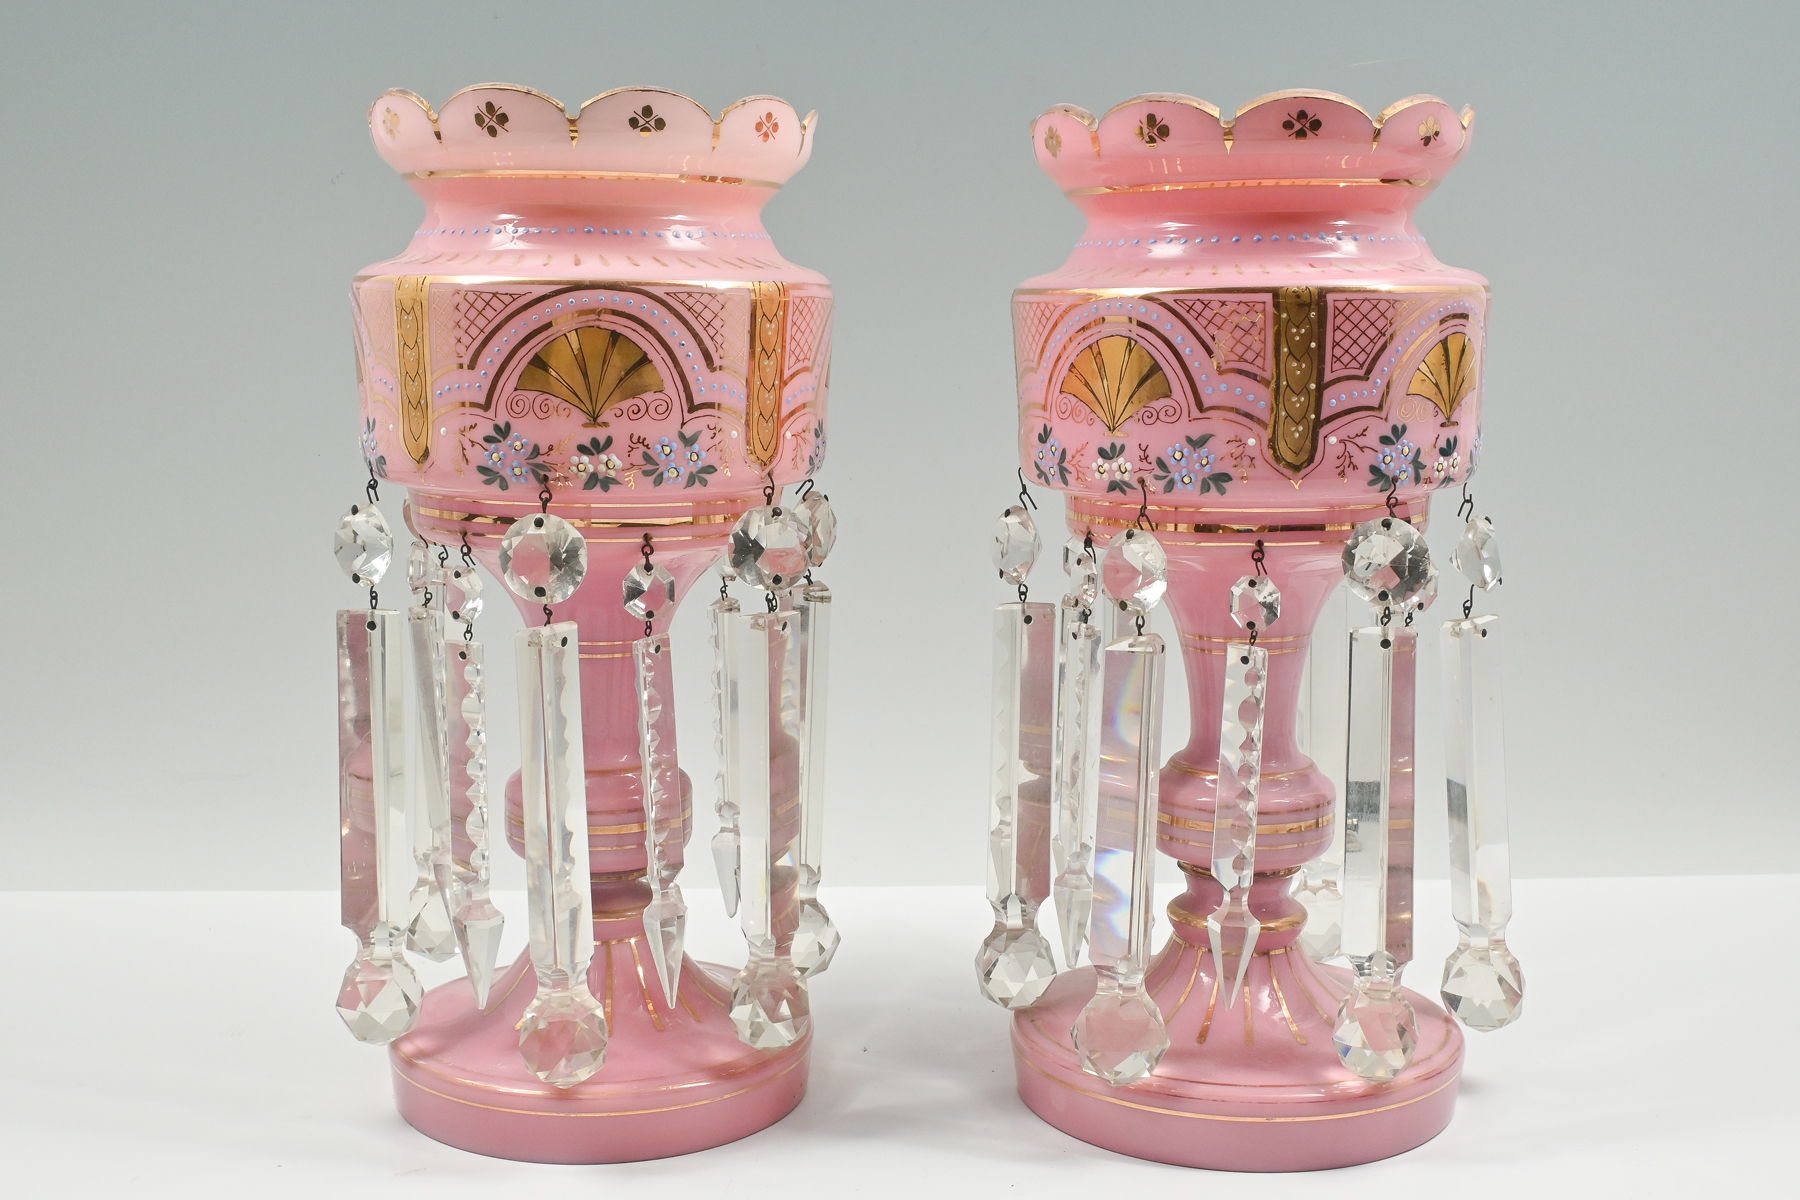 PAIR OF PINK GLASS MANTLE LUSTRES 2ecb08